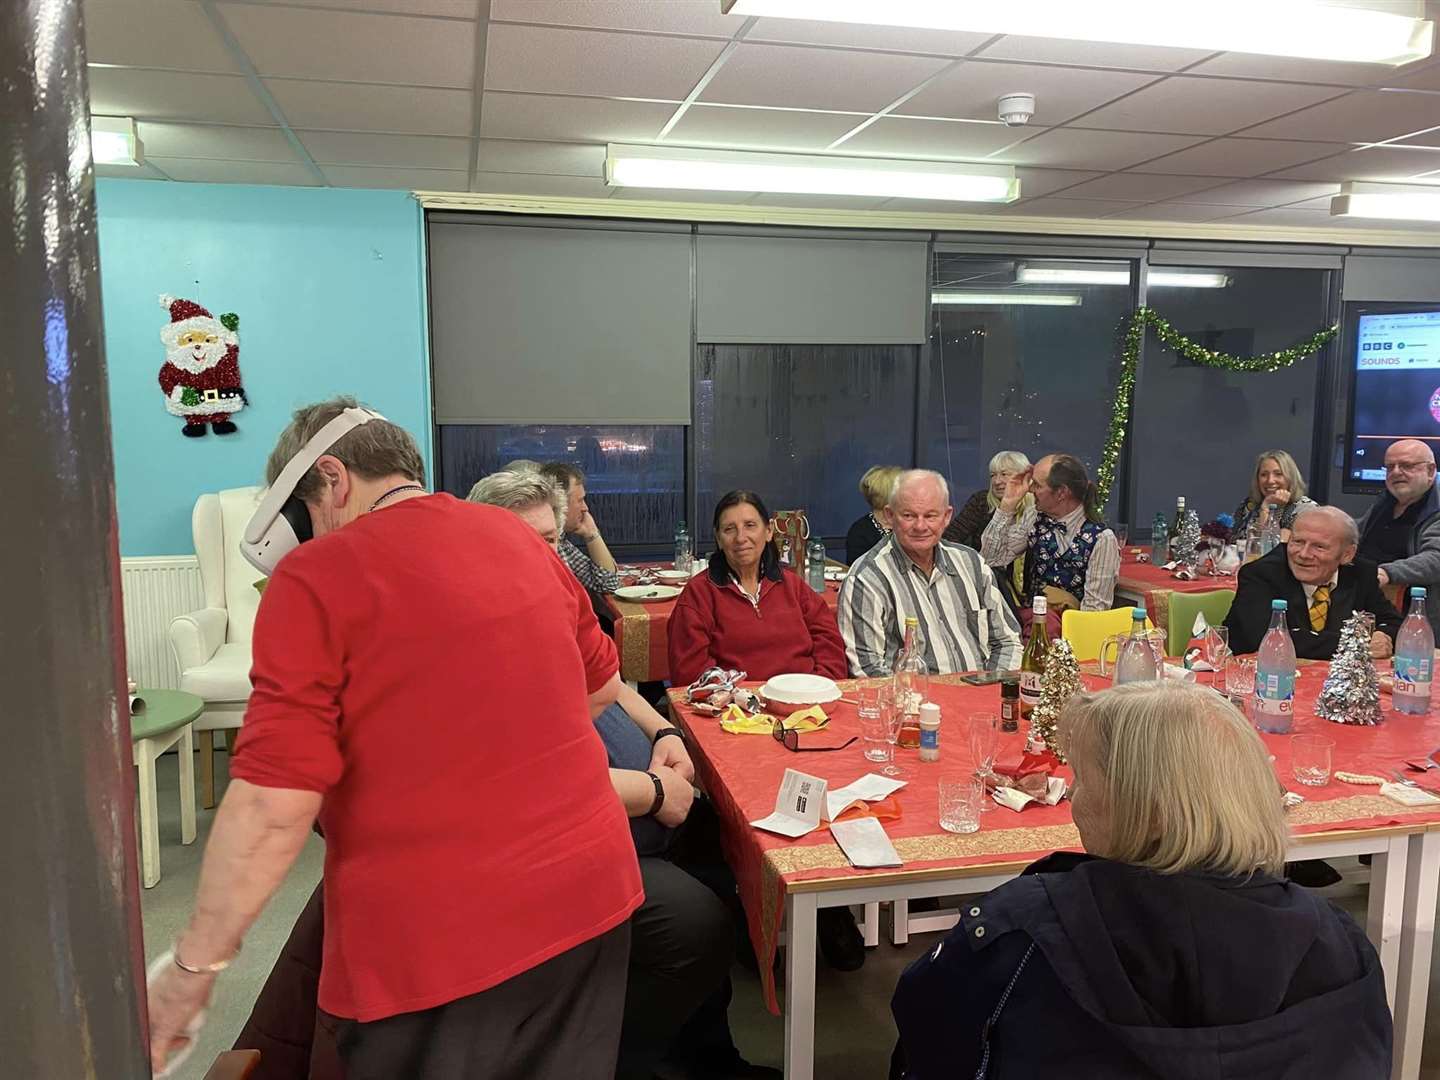 Residents of Helmsdale and the surrounding community enjoyed their meal in good company.